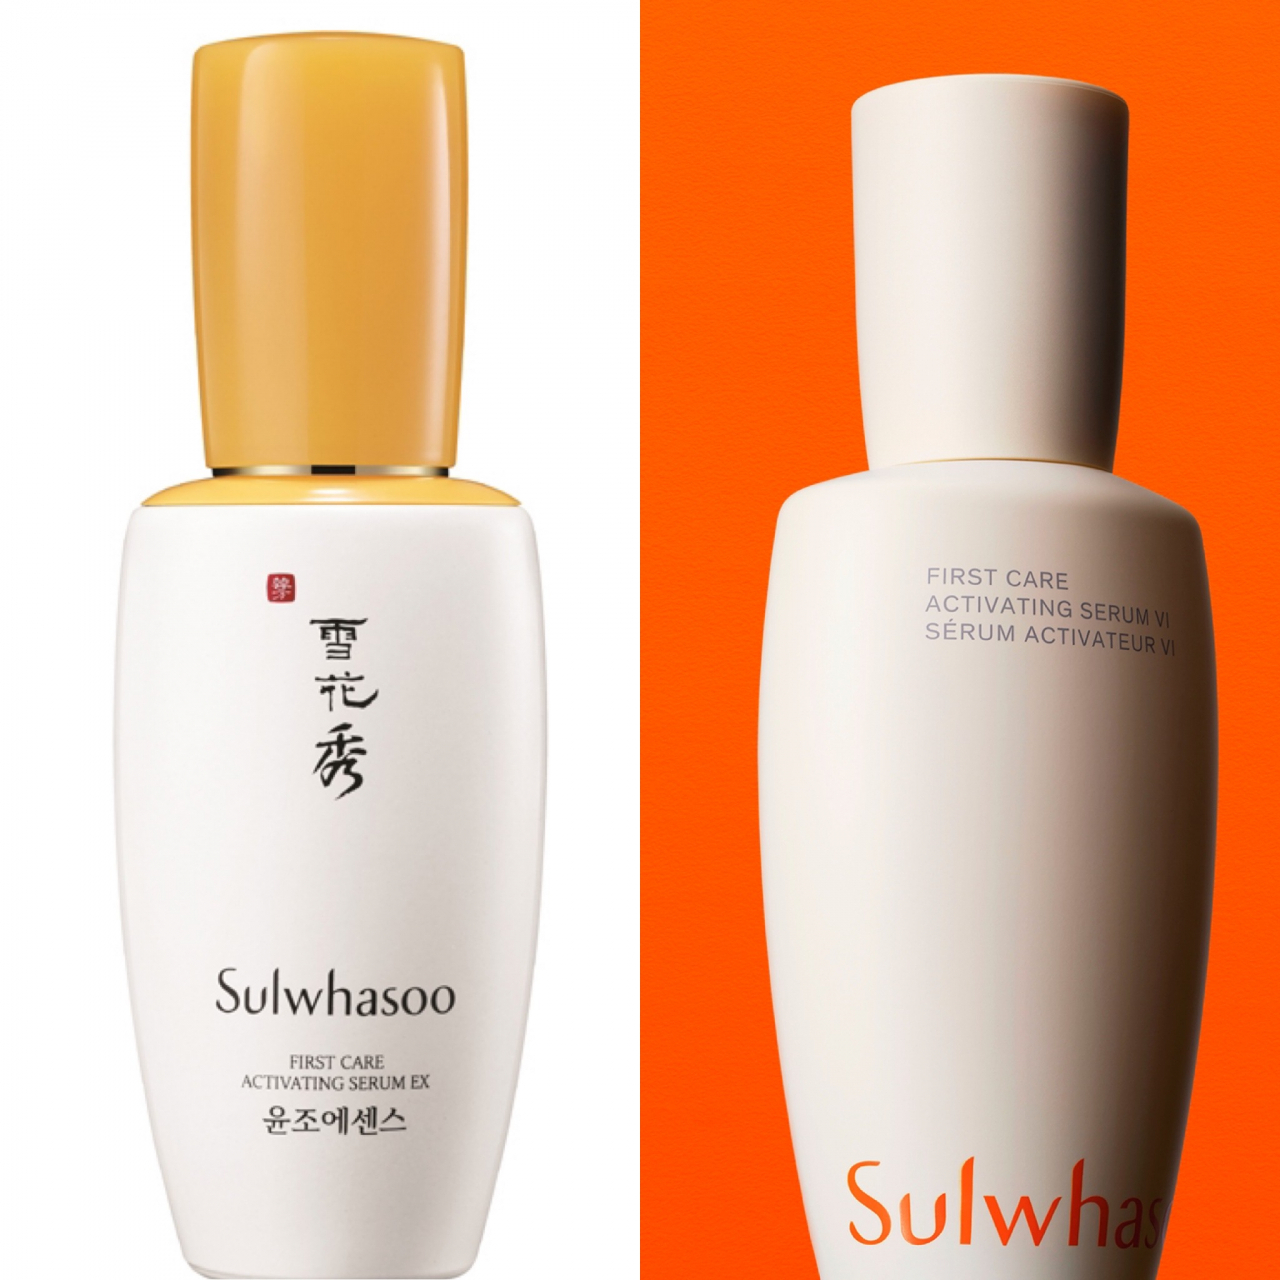 Sulwhasoo's First Care Activating Serum V (left) and First Care Activating Serum VI (Amorepacific)